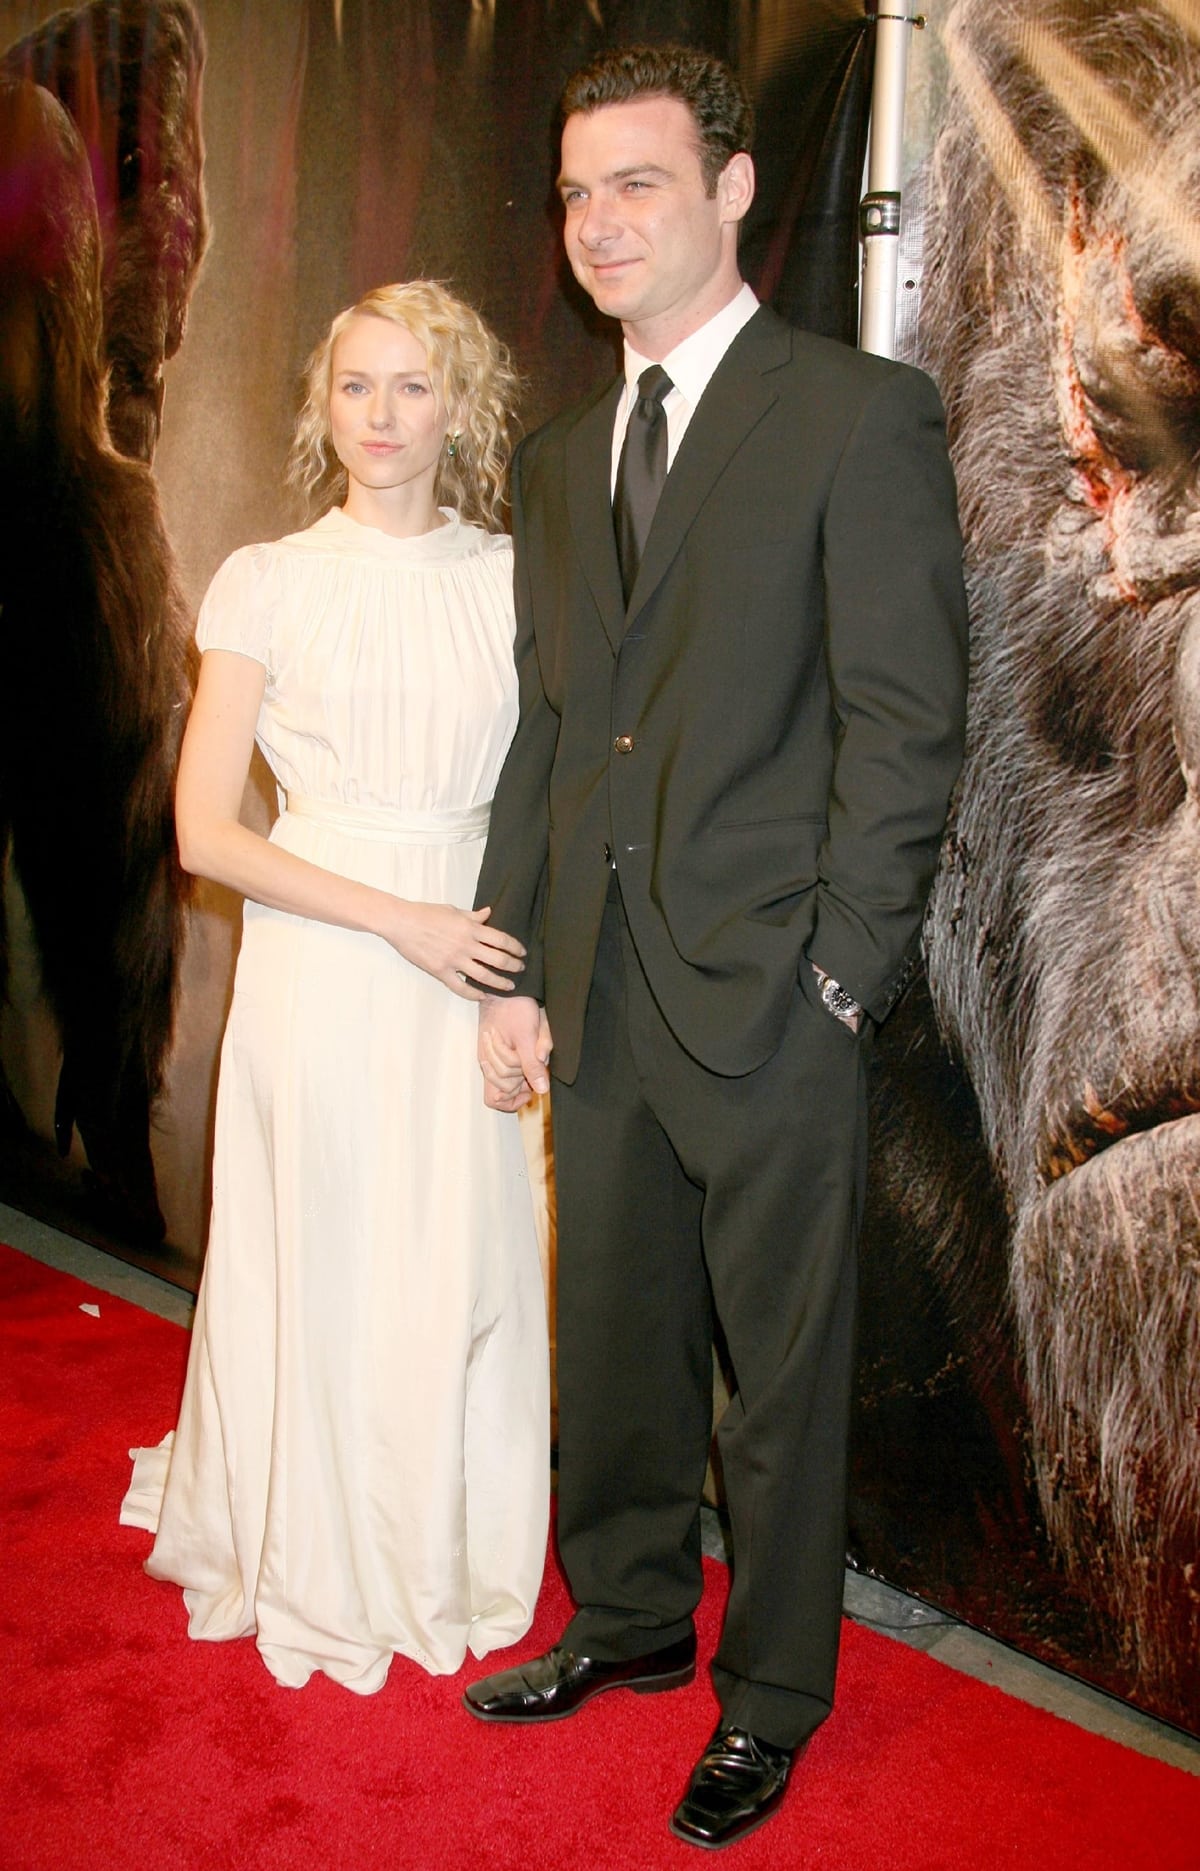 Naomi Watts and Liev Schreiber during the premiere of King Kong